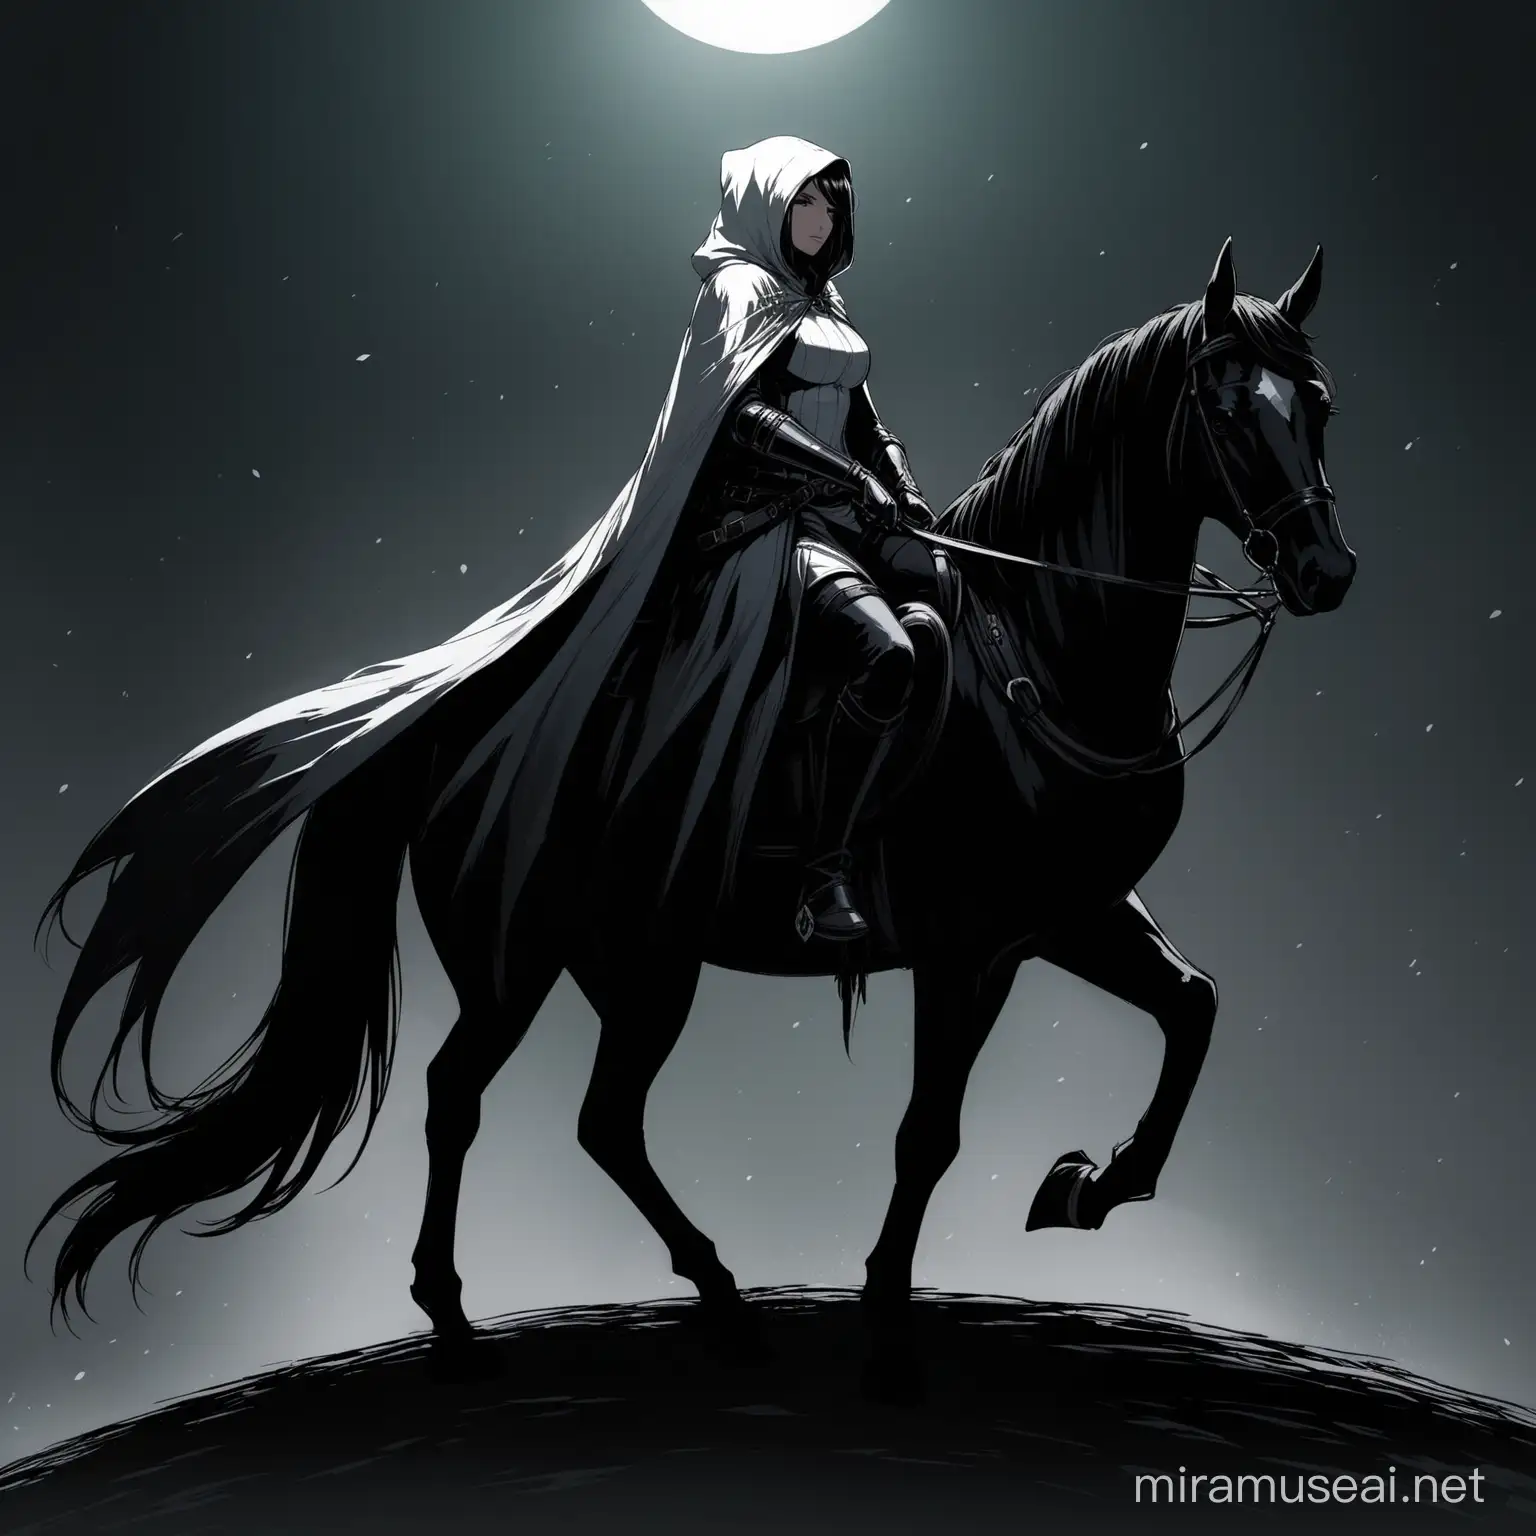 A horse of shadows and pitch darkness with a female assassin wearing a white assassin cloak sitting on the back of the standing dark horse.